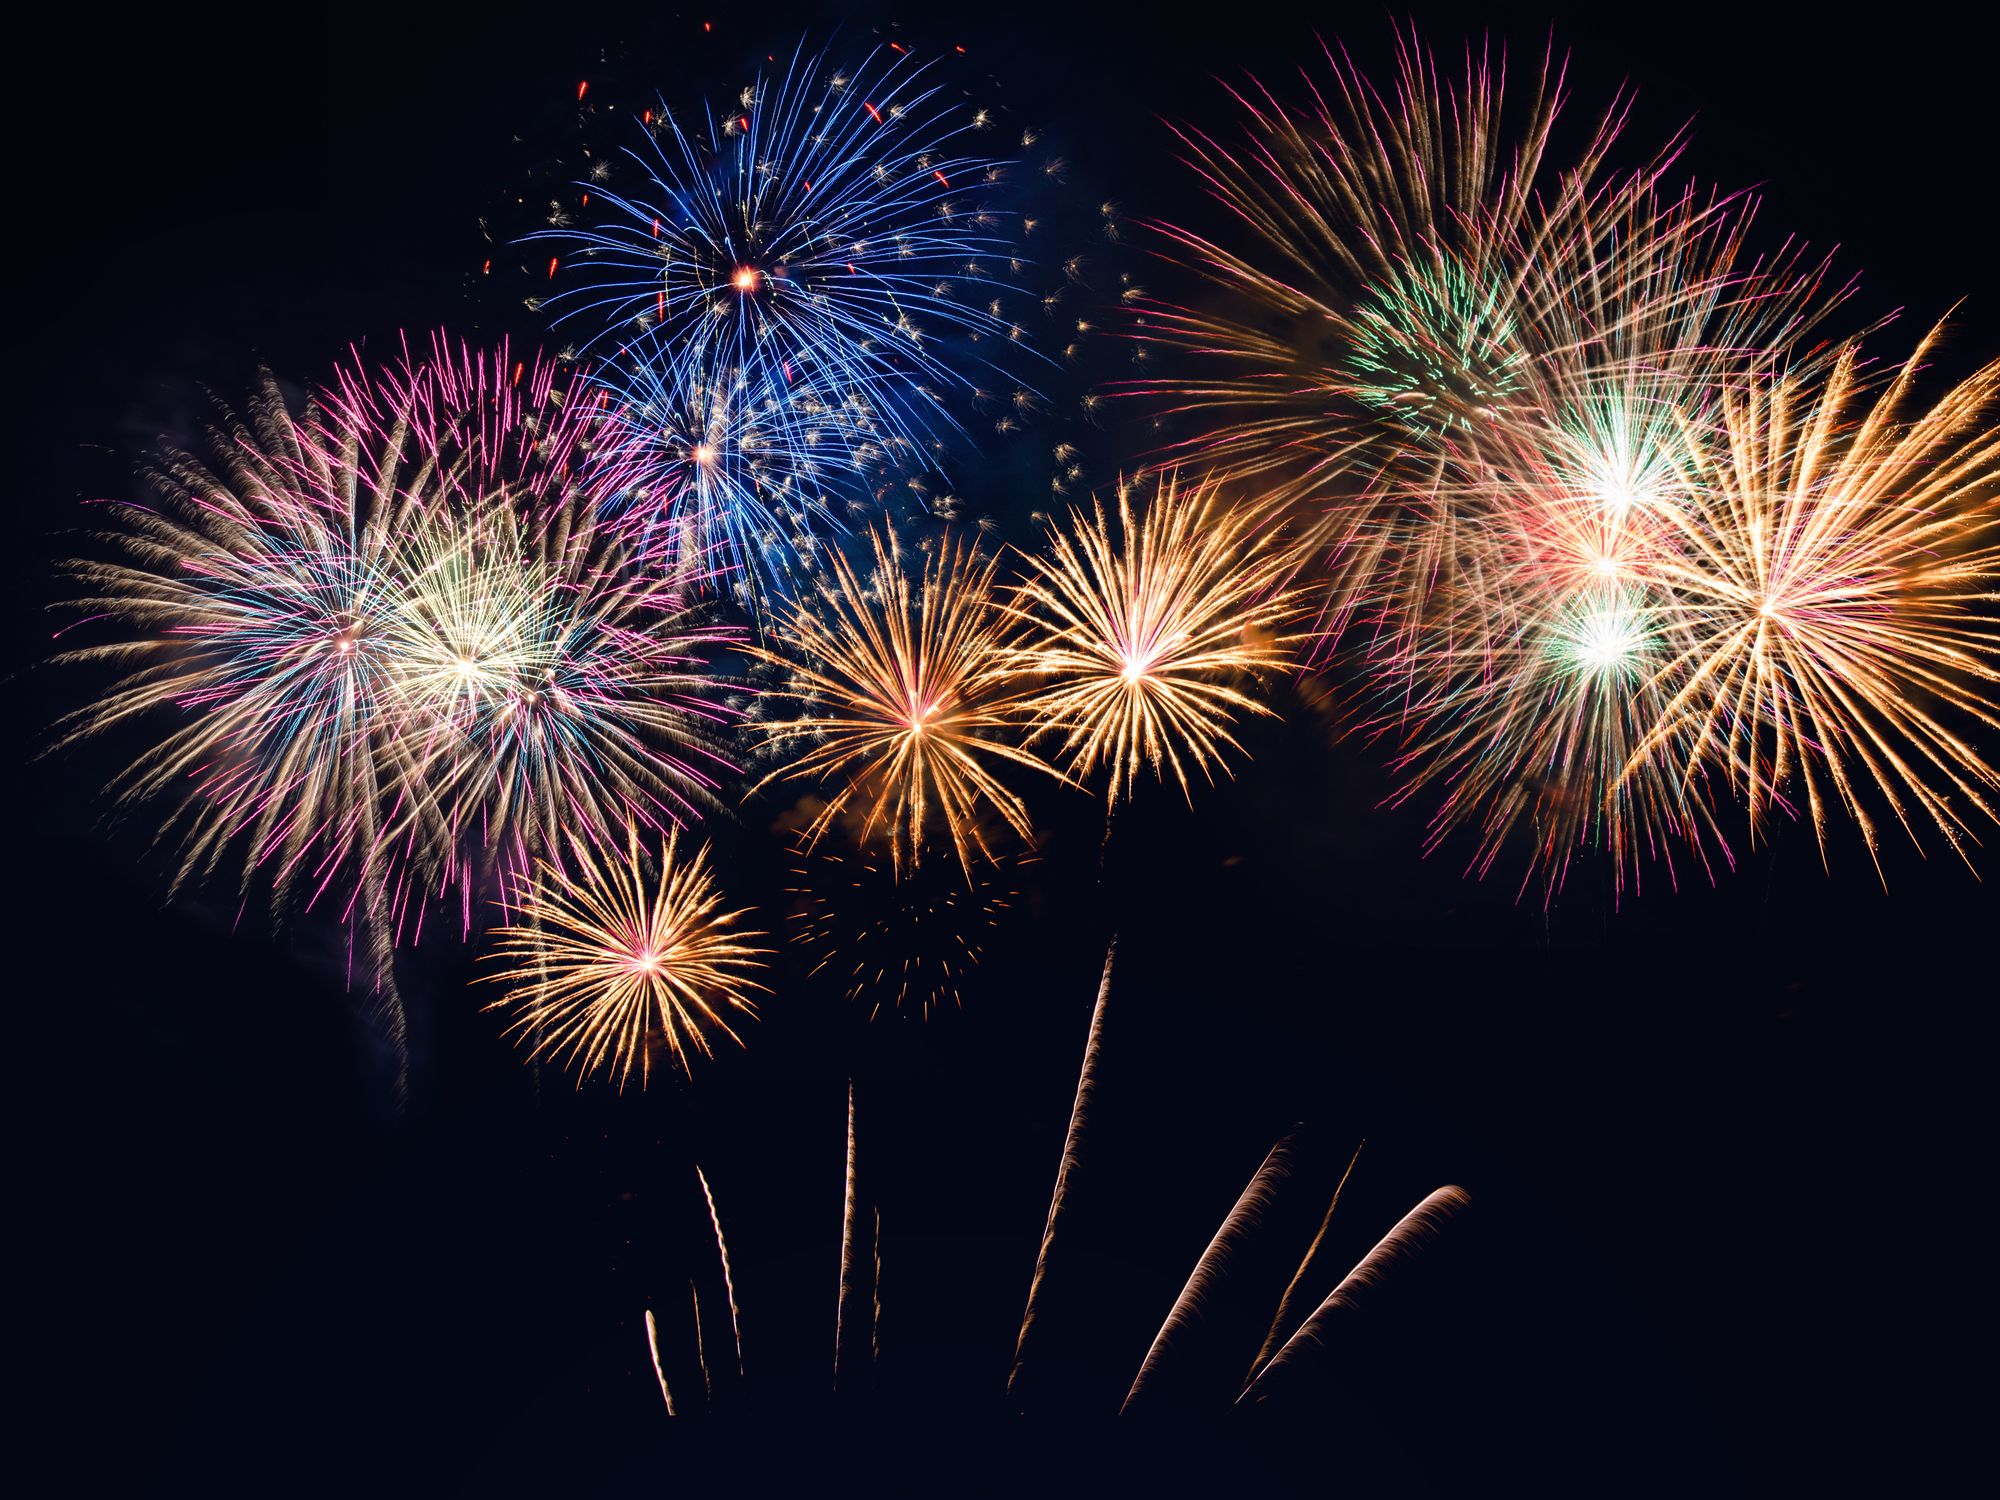 Do Fireworks Work? The Science of Fireworks